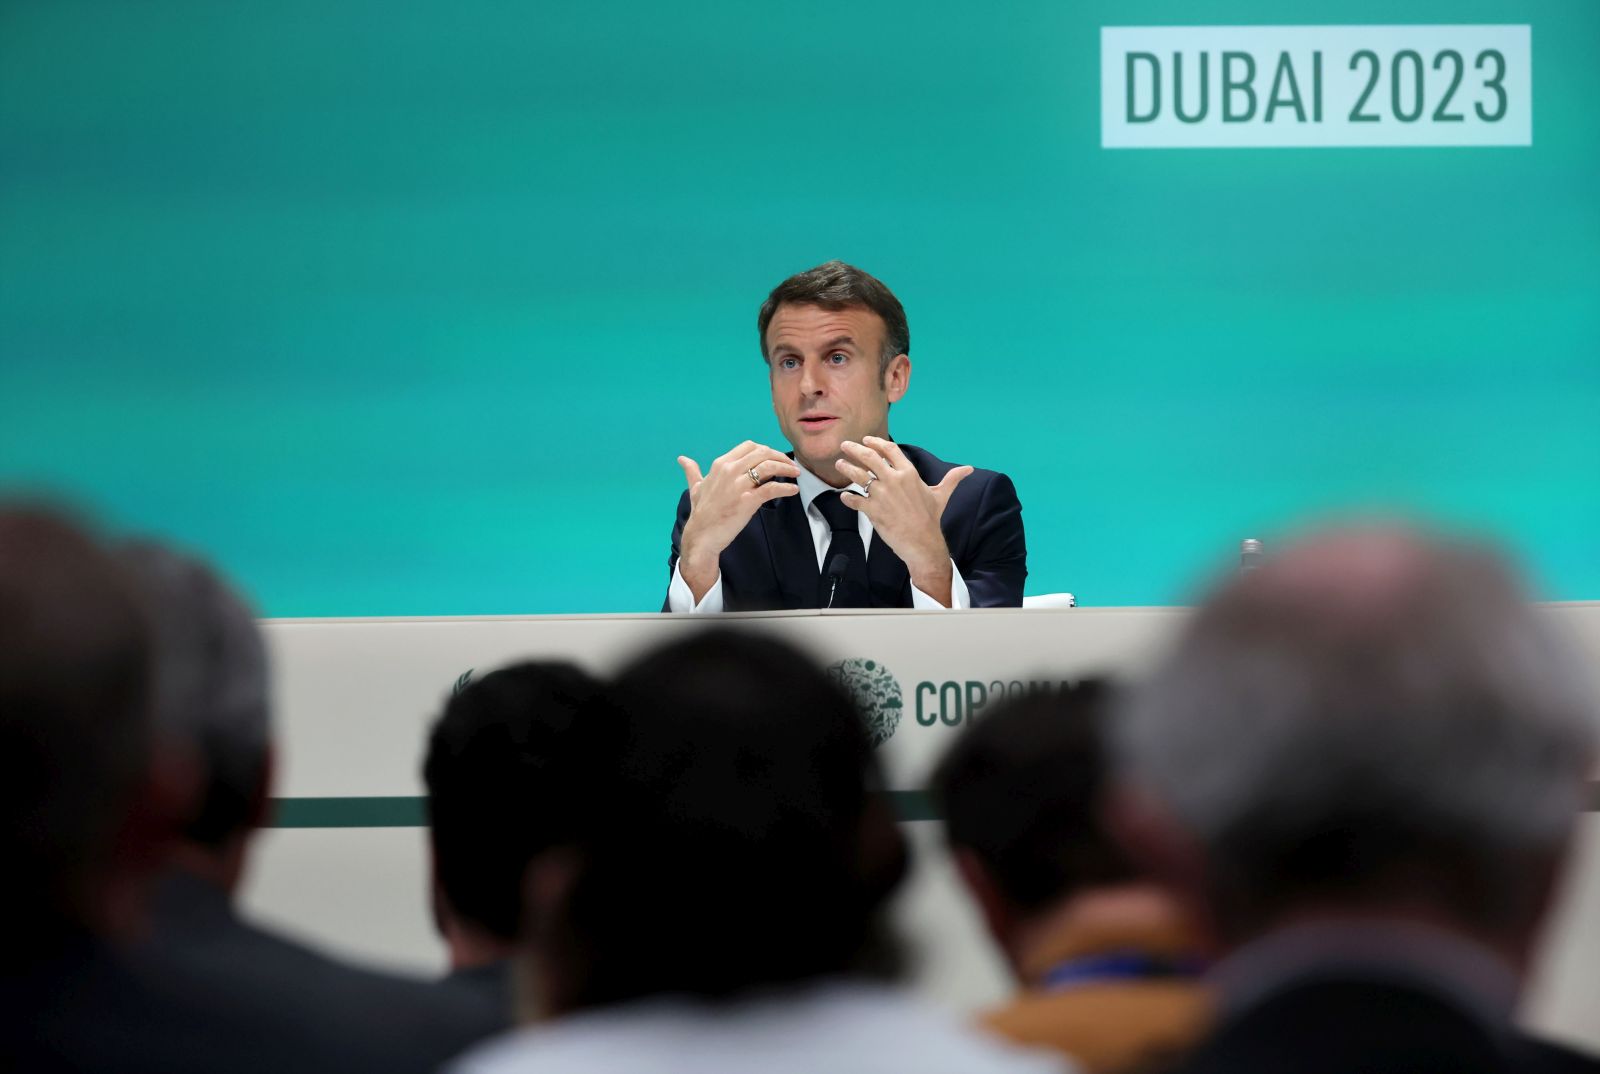 epa11007398 French President Emmanuel Macron speaks during a press conference as part of the third day of the 2023 United Nations Climate Change Conference (COP28) at Expo City Dubai in Dubai, UAE, 02 December 2023. The 2023 United Nations Climate Change Conference (COP28), runs from 30 November to 12 December, and is expected to host one of the largest number of participants in the annual global climate conference as over 70,000 estimated attendees, including the member states of the UN Framework Convention on Climate Change (UNFCCC), business leaders, young people, climate scientists, Indigenous Peoples and other relevant stakeholders will attend.  EPA/ALI HAIDER